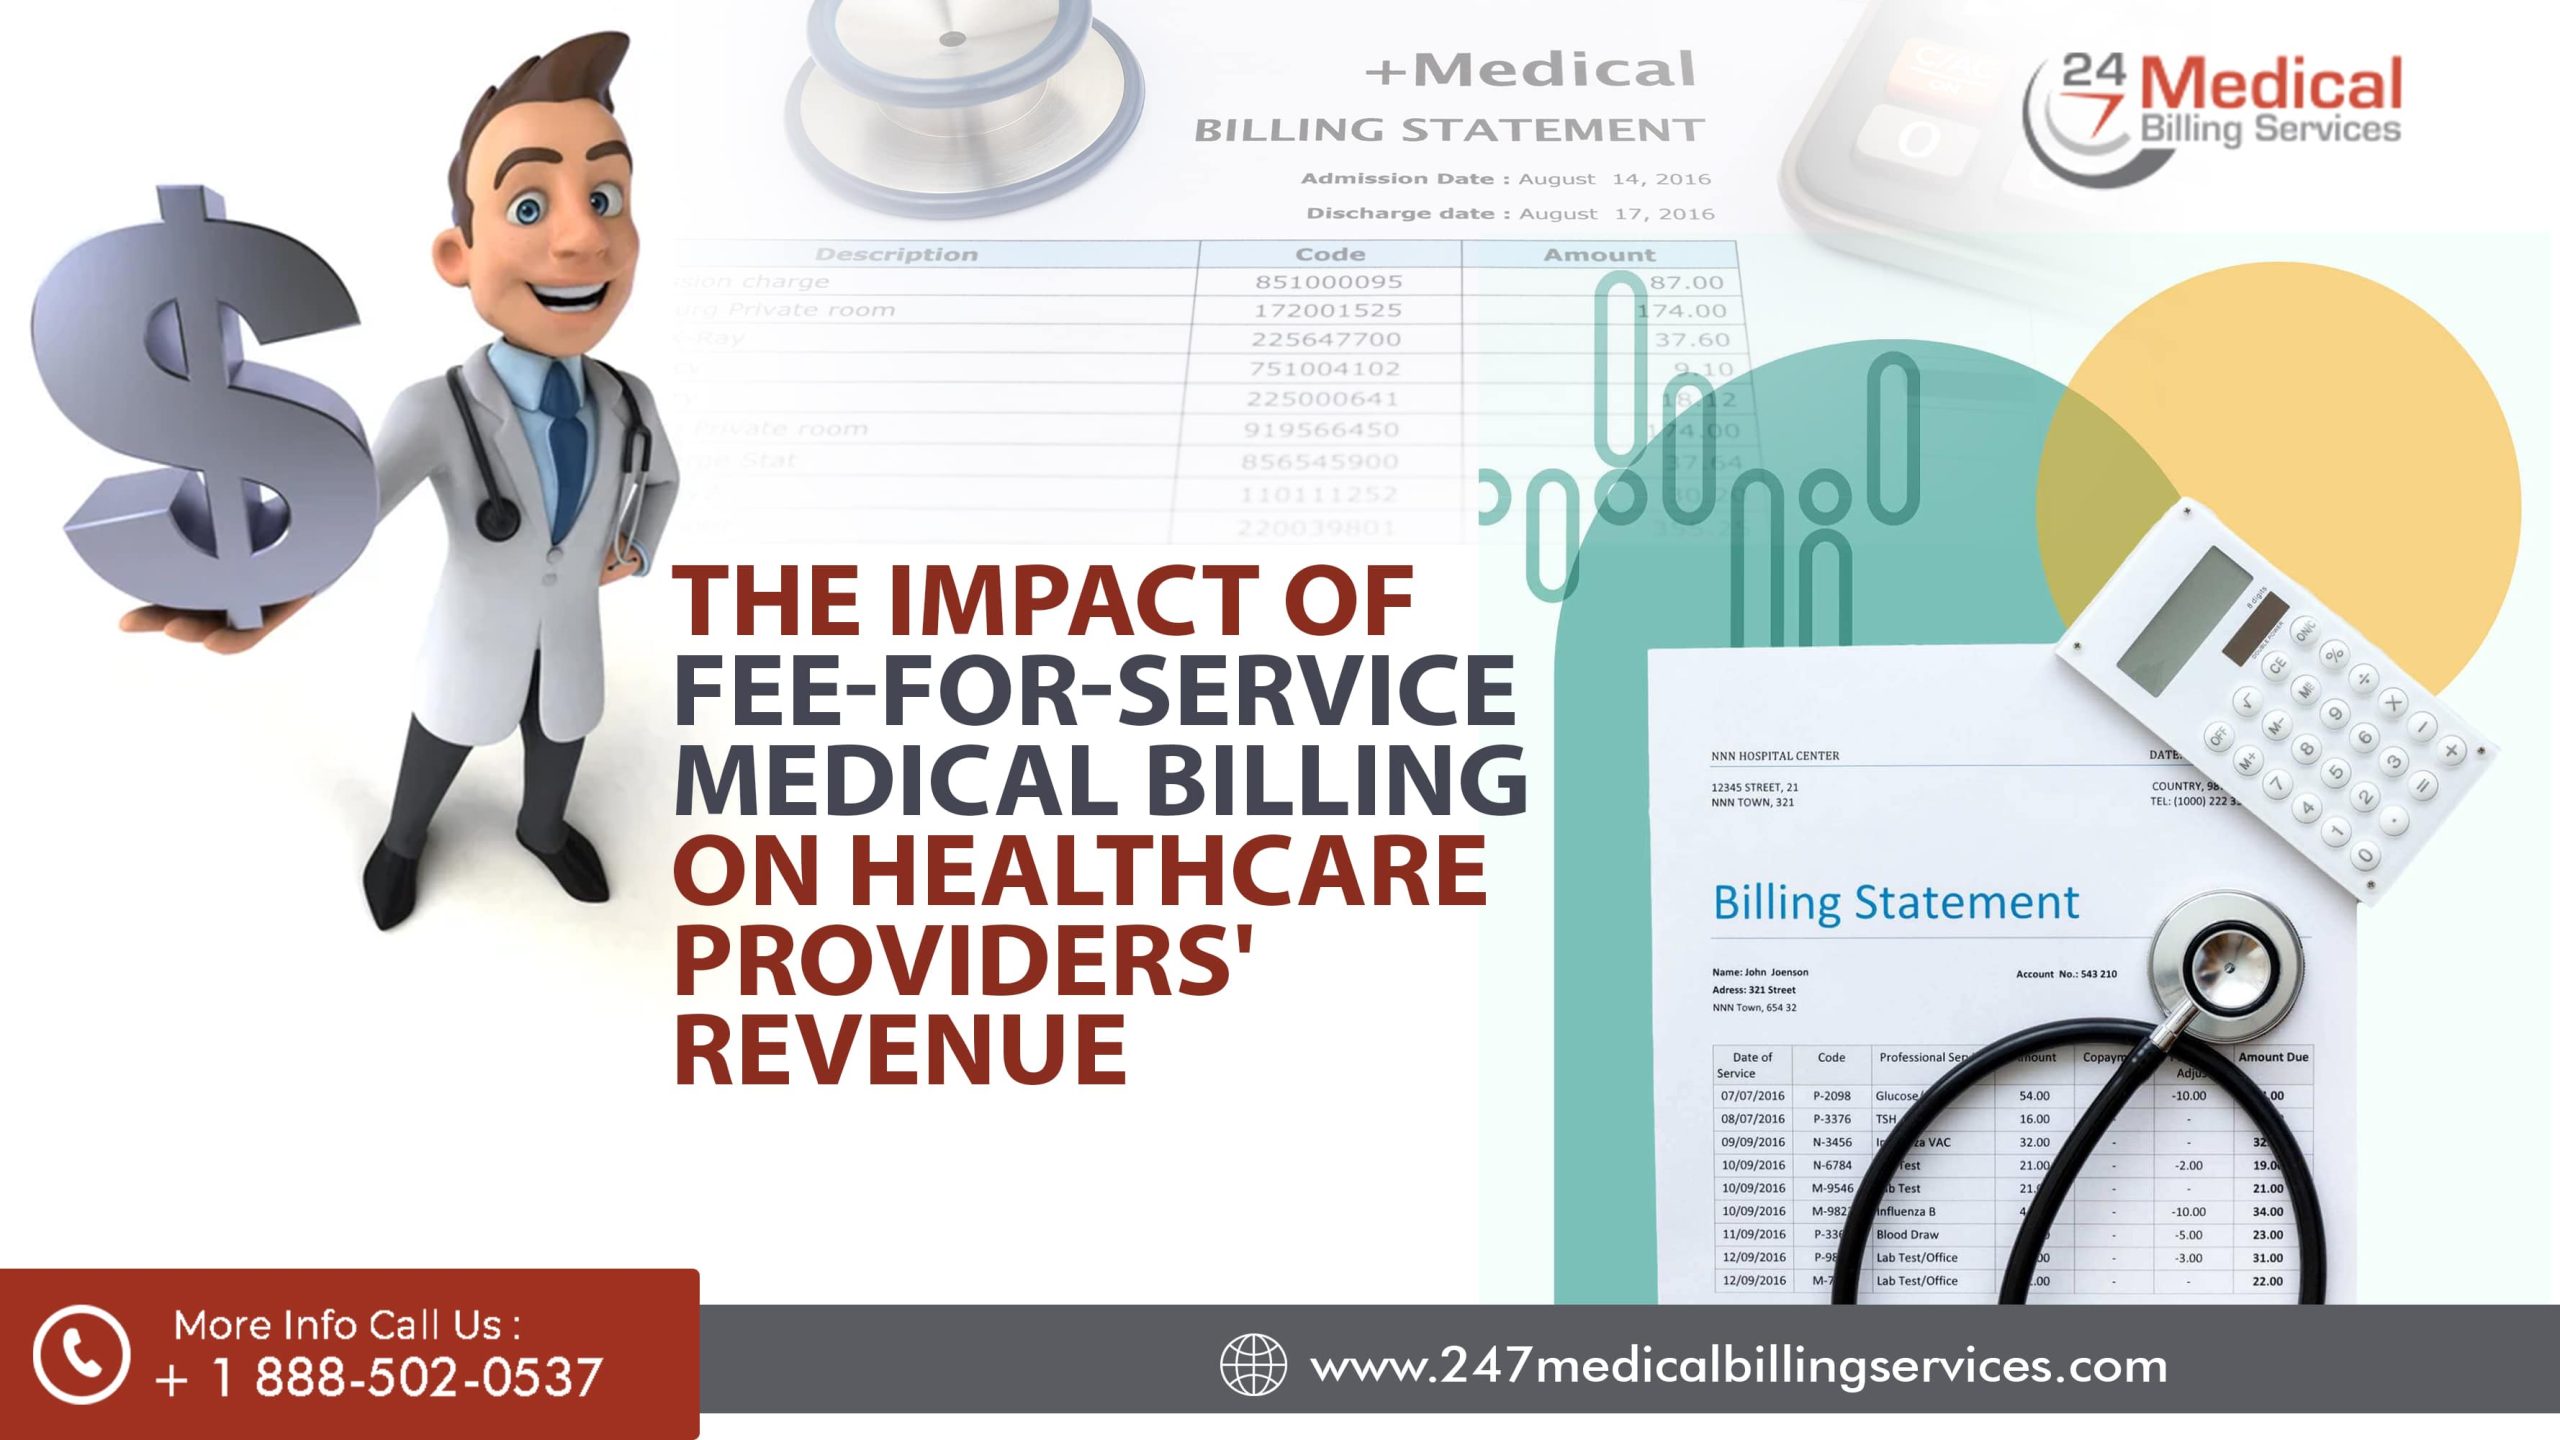  The Impact of Fee-For-Service Medical Billing on Healthcare Providers’ Revenue